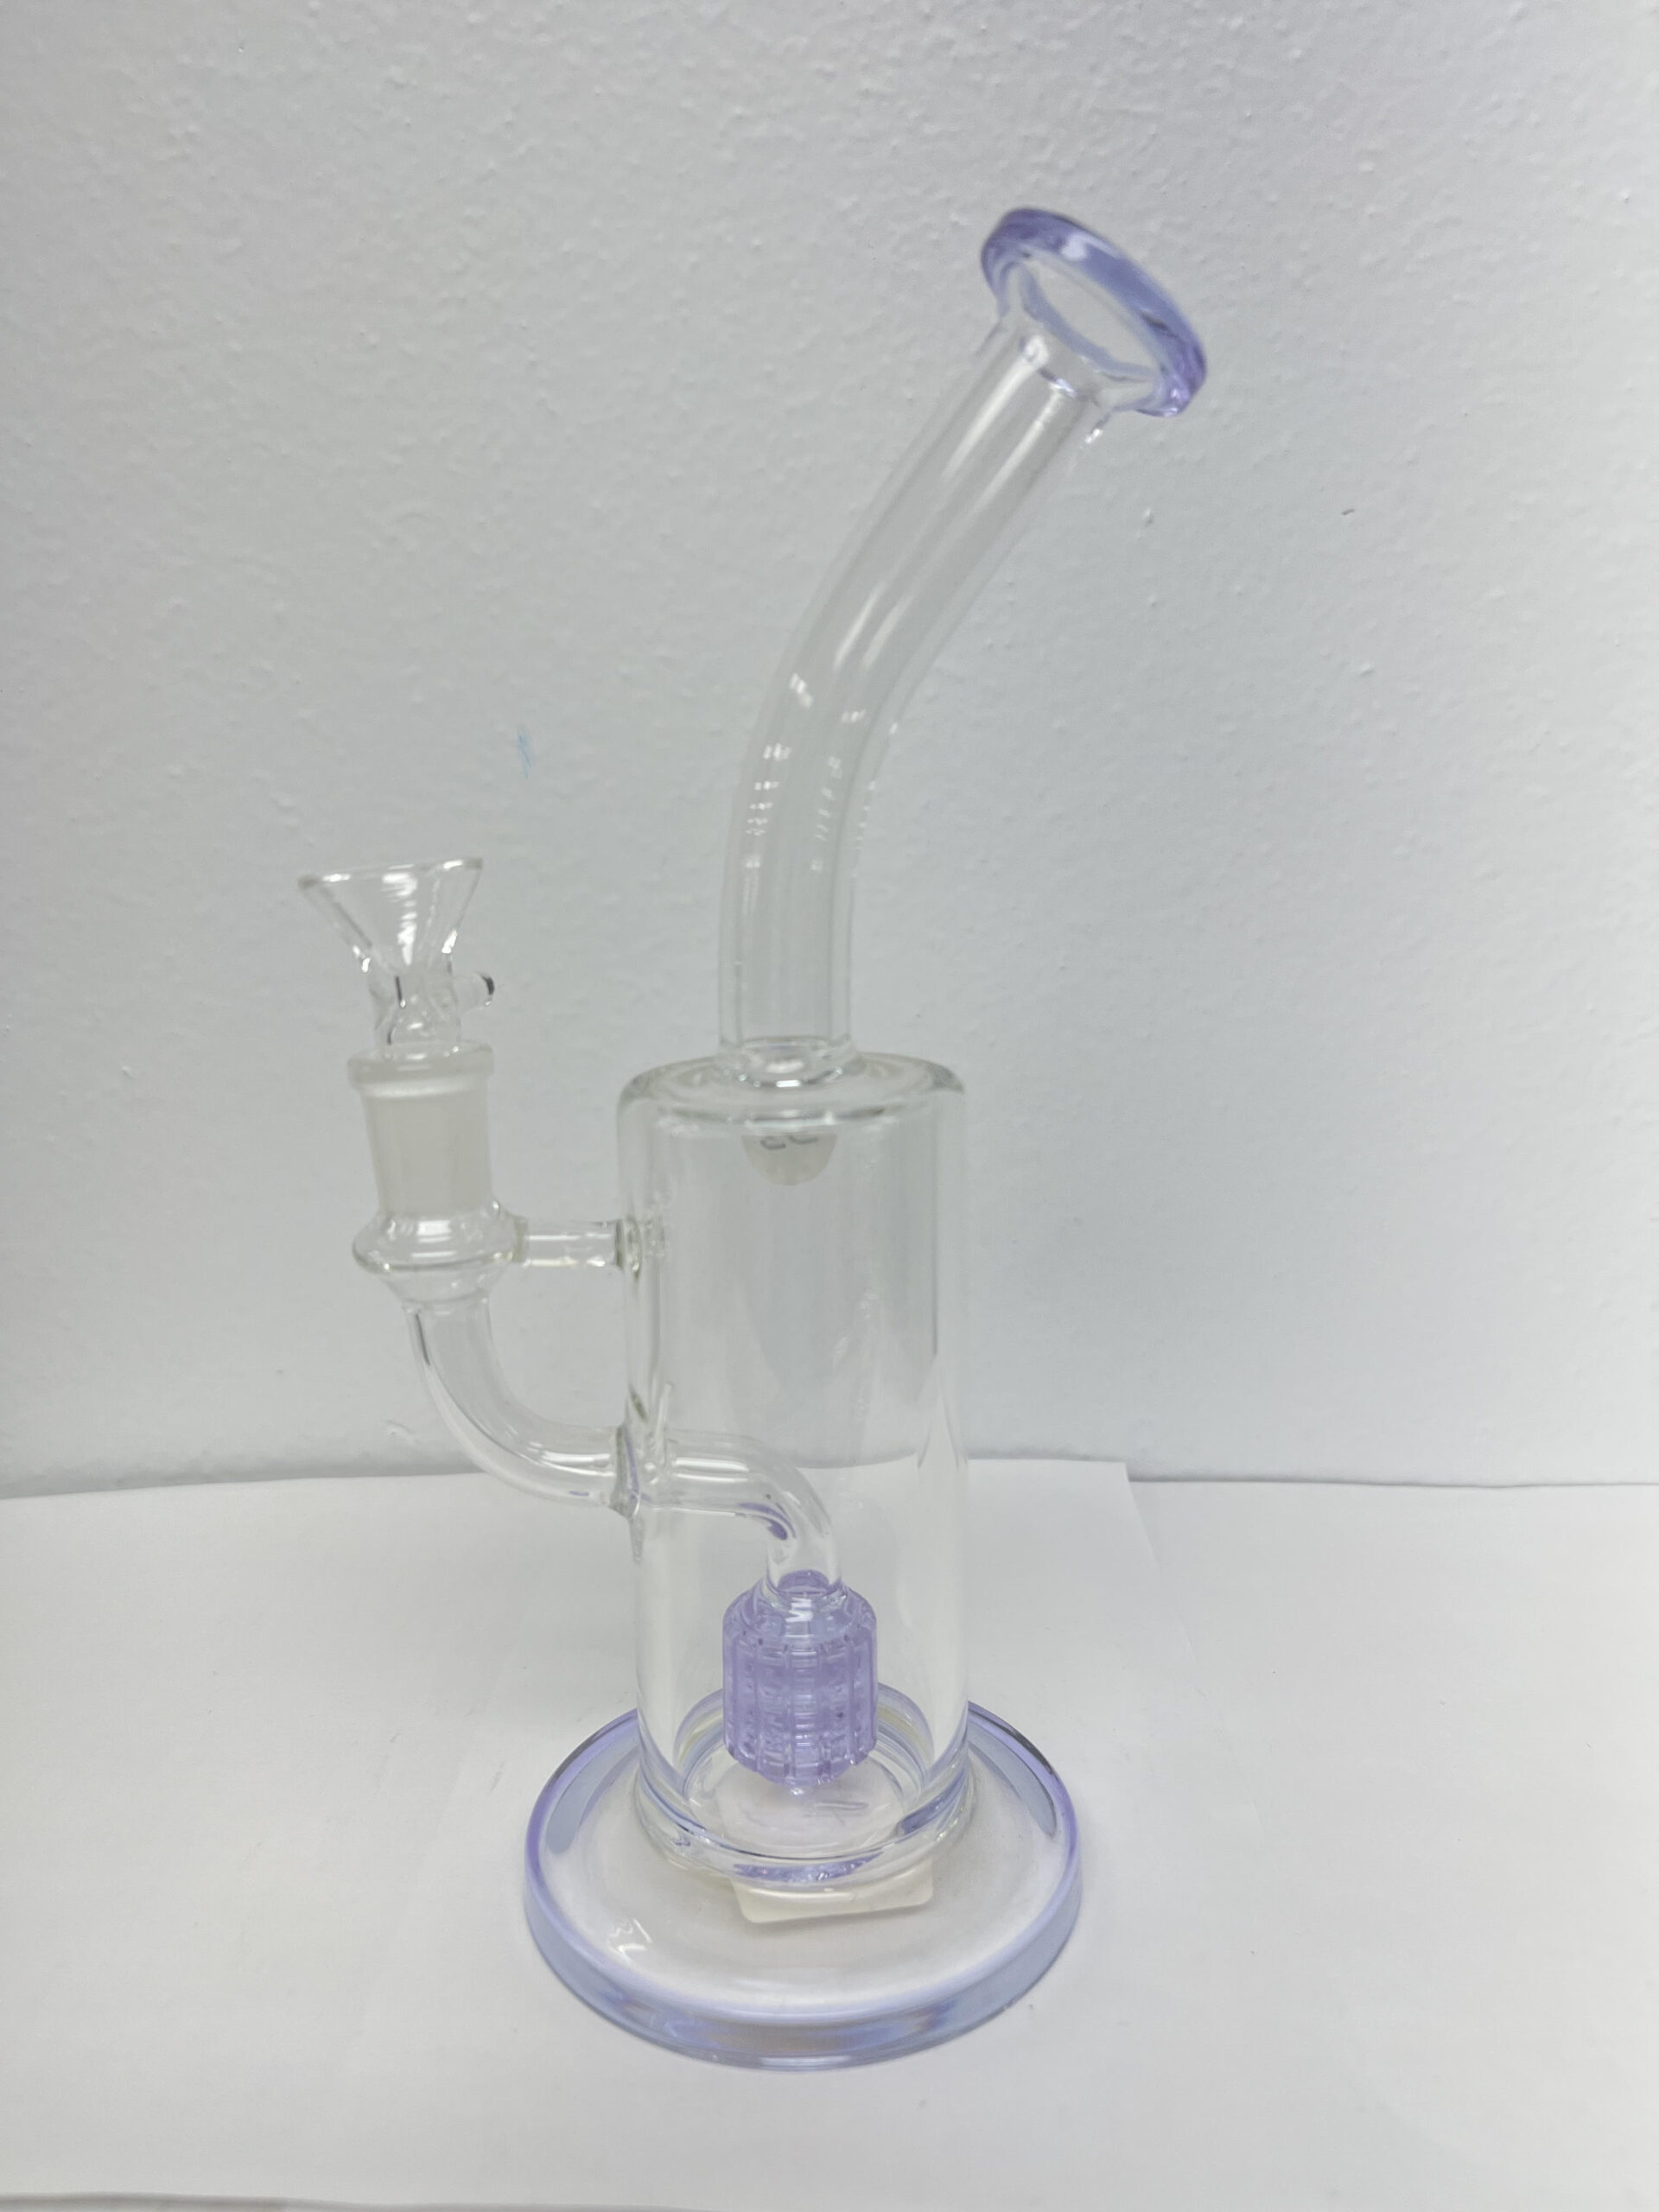  How to buy smoking water pipe online